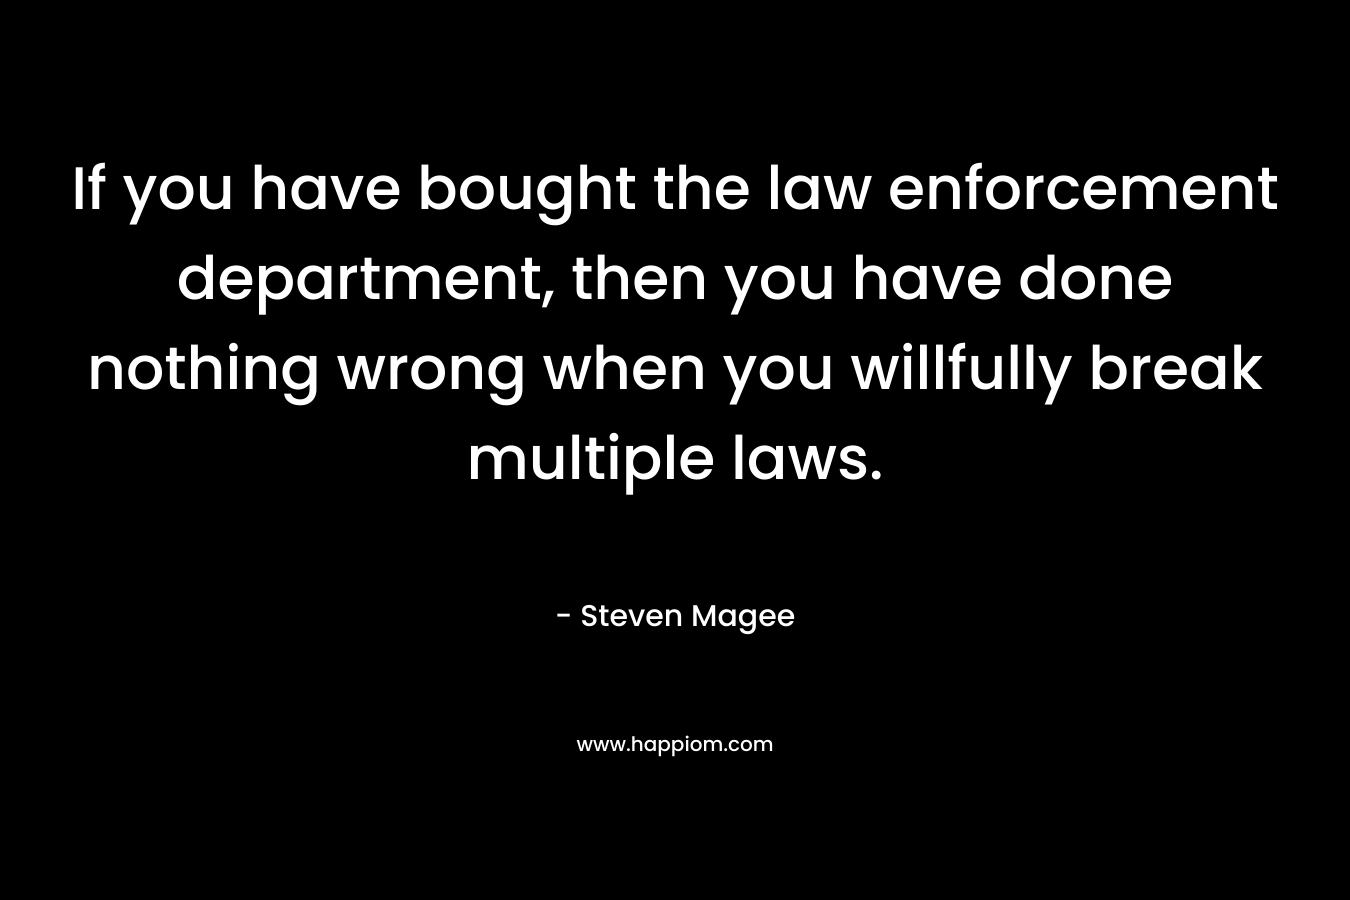 If you have bought the law enforcement department, then you have done nothing wrong when you willfully break multiple laws.